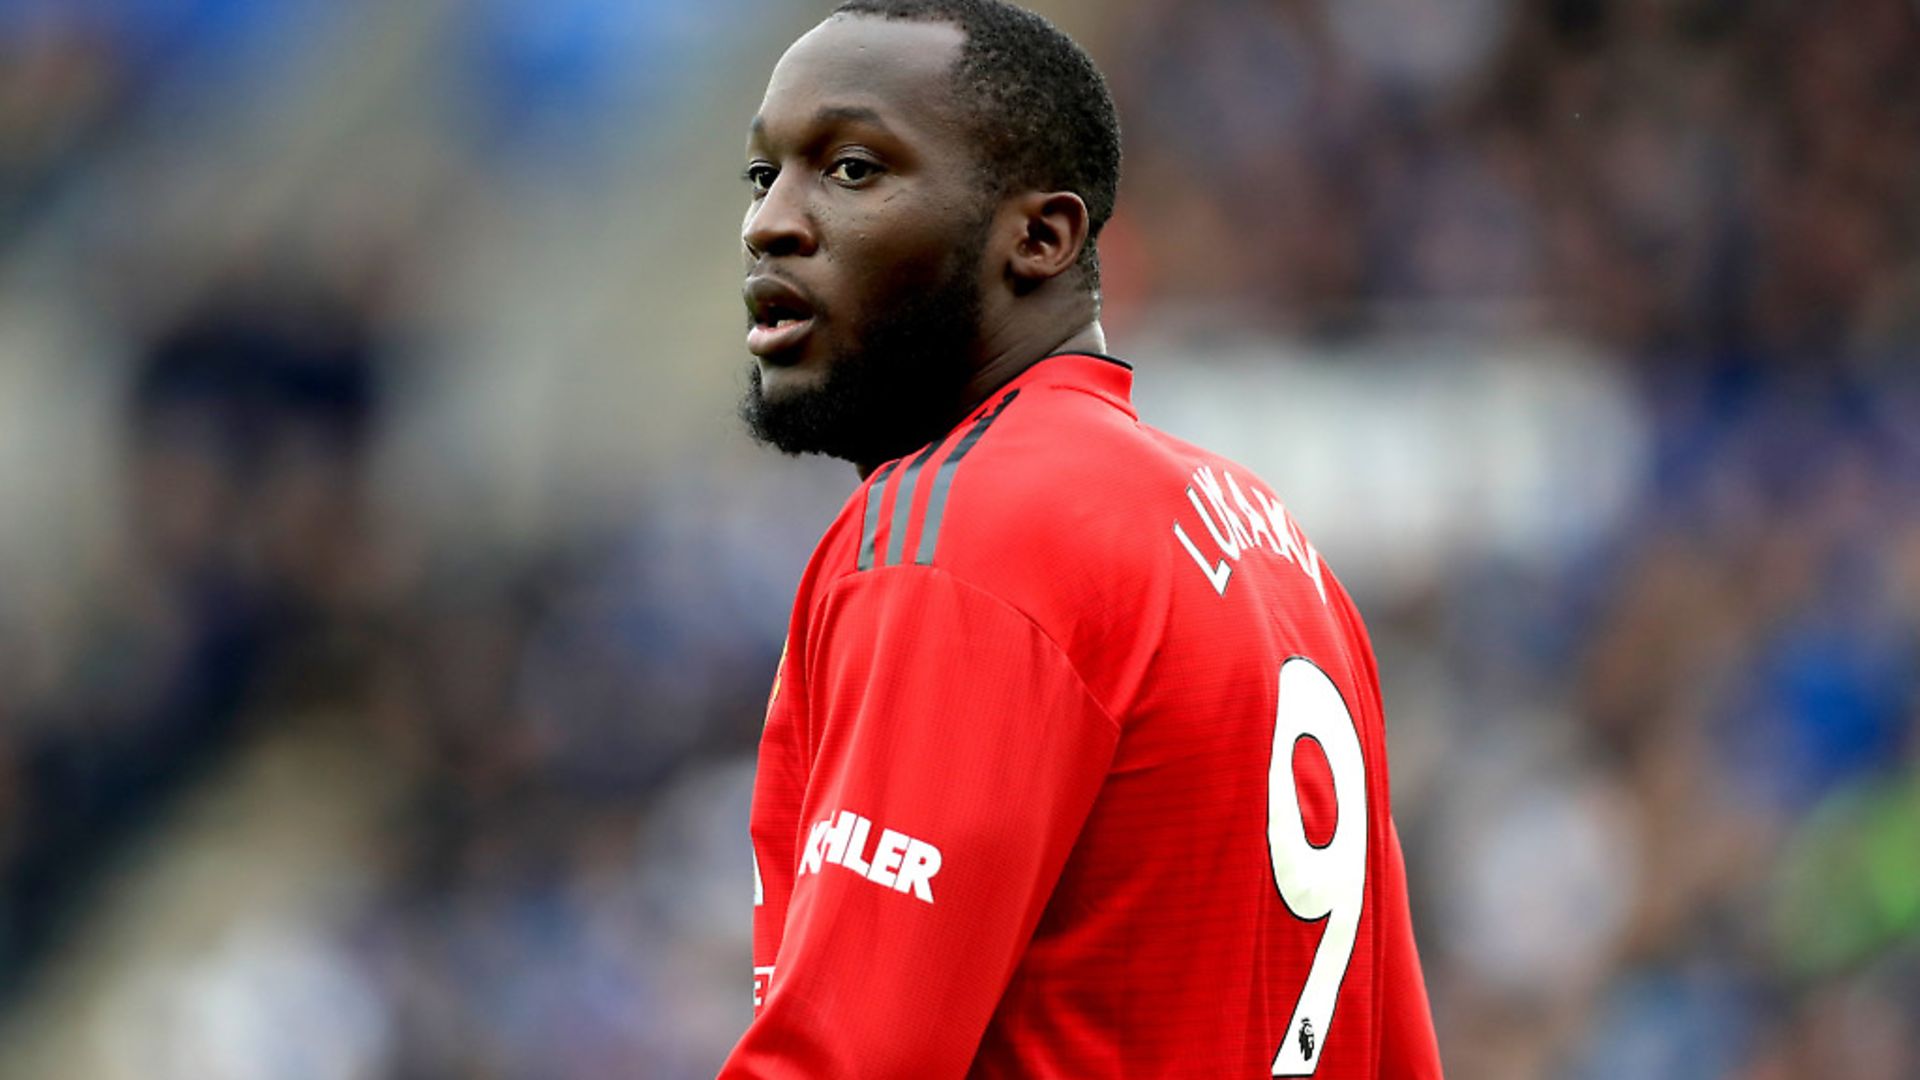 Romelu Lukaku in action for Manchester United during a Premier League match at Leicester City's King Power Stadium (question nine) (Pic: Mike Egerton/PA) - Credit: PA Wire/PA Images